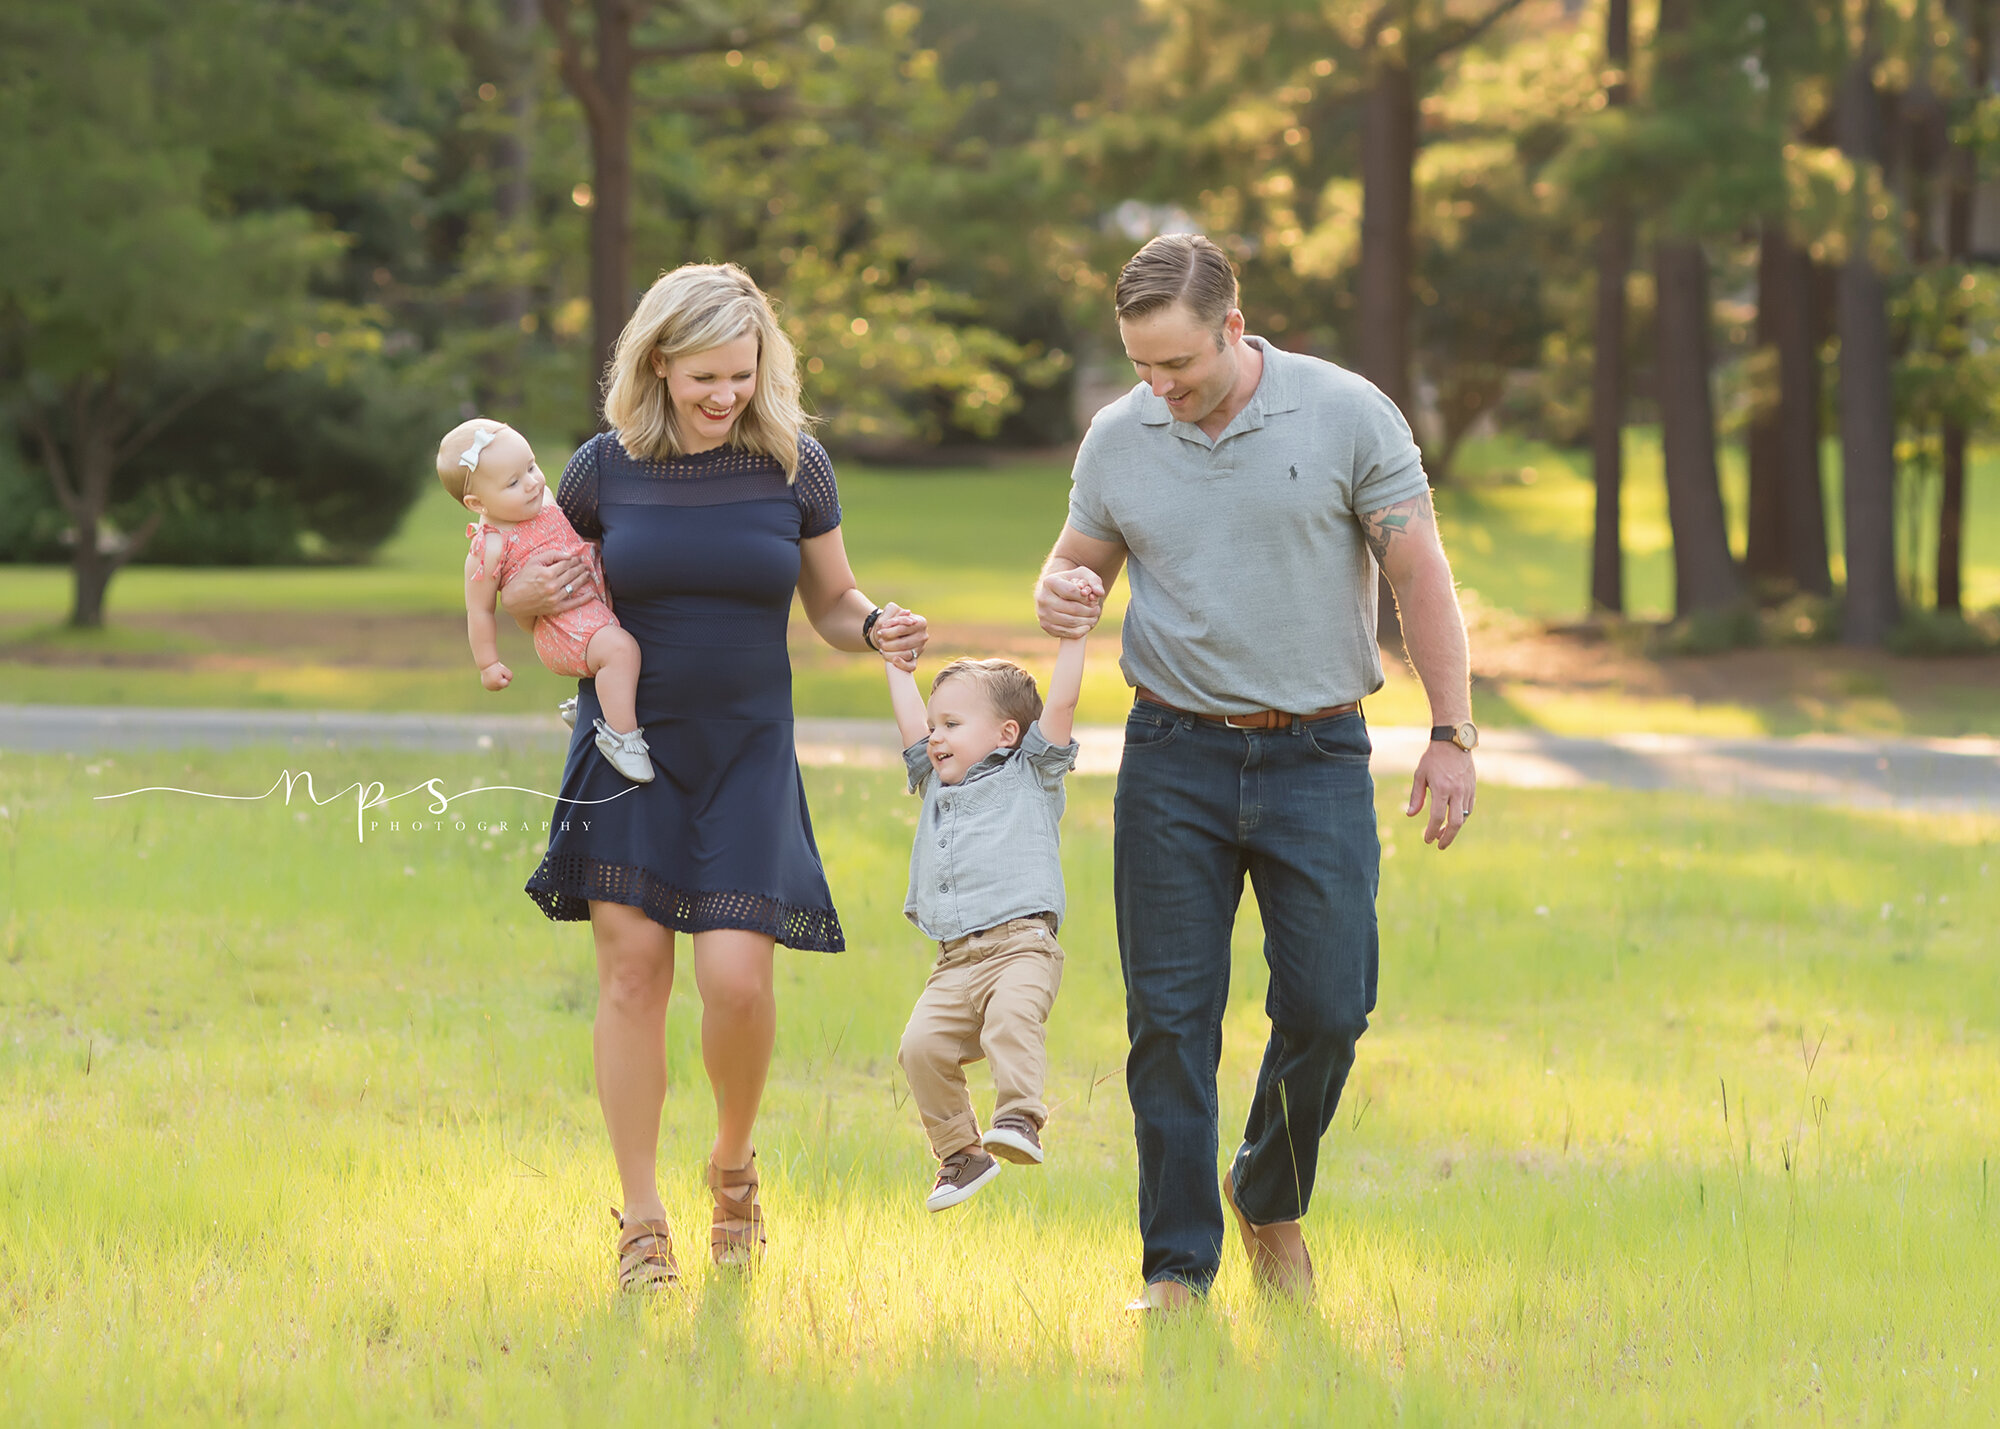 NPS-Photography-Whispering Pines Family Photographer-M-007